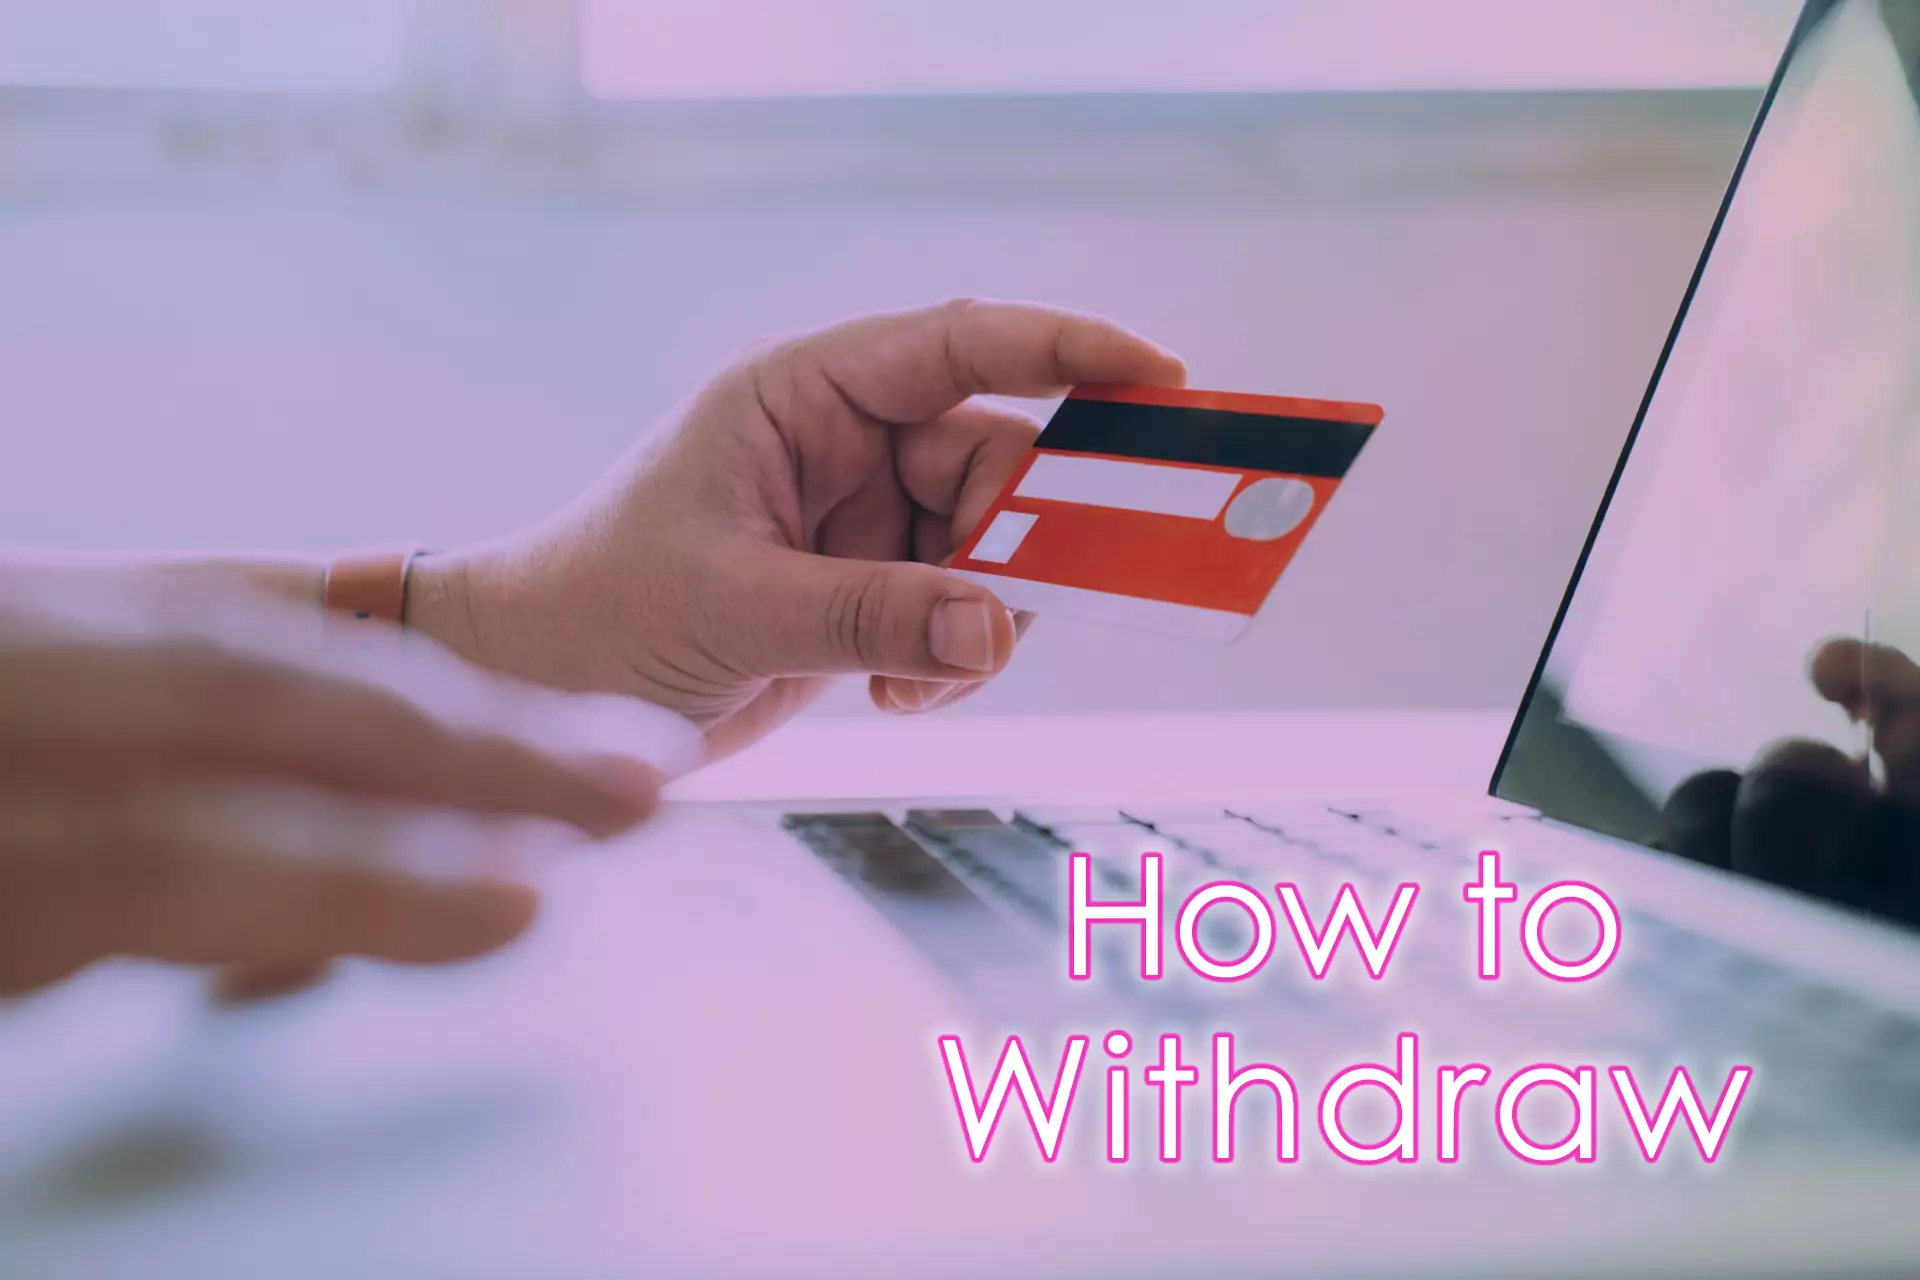 If you win funds, you can immediately withdraw money to your bank card.